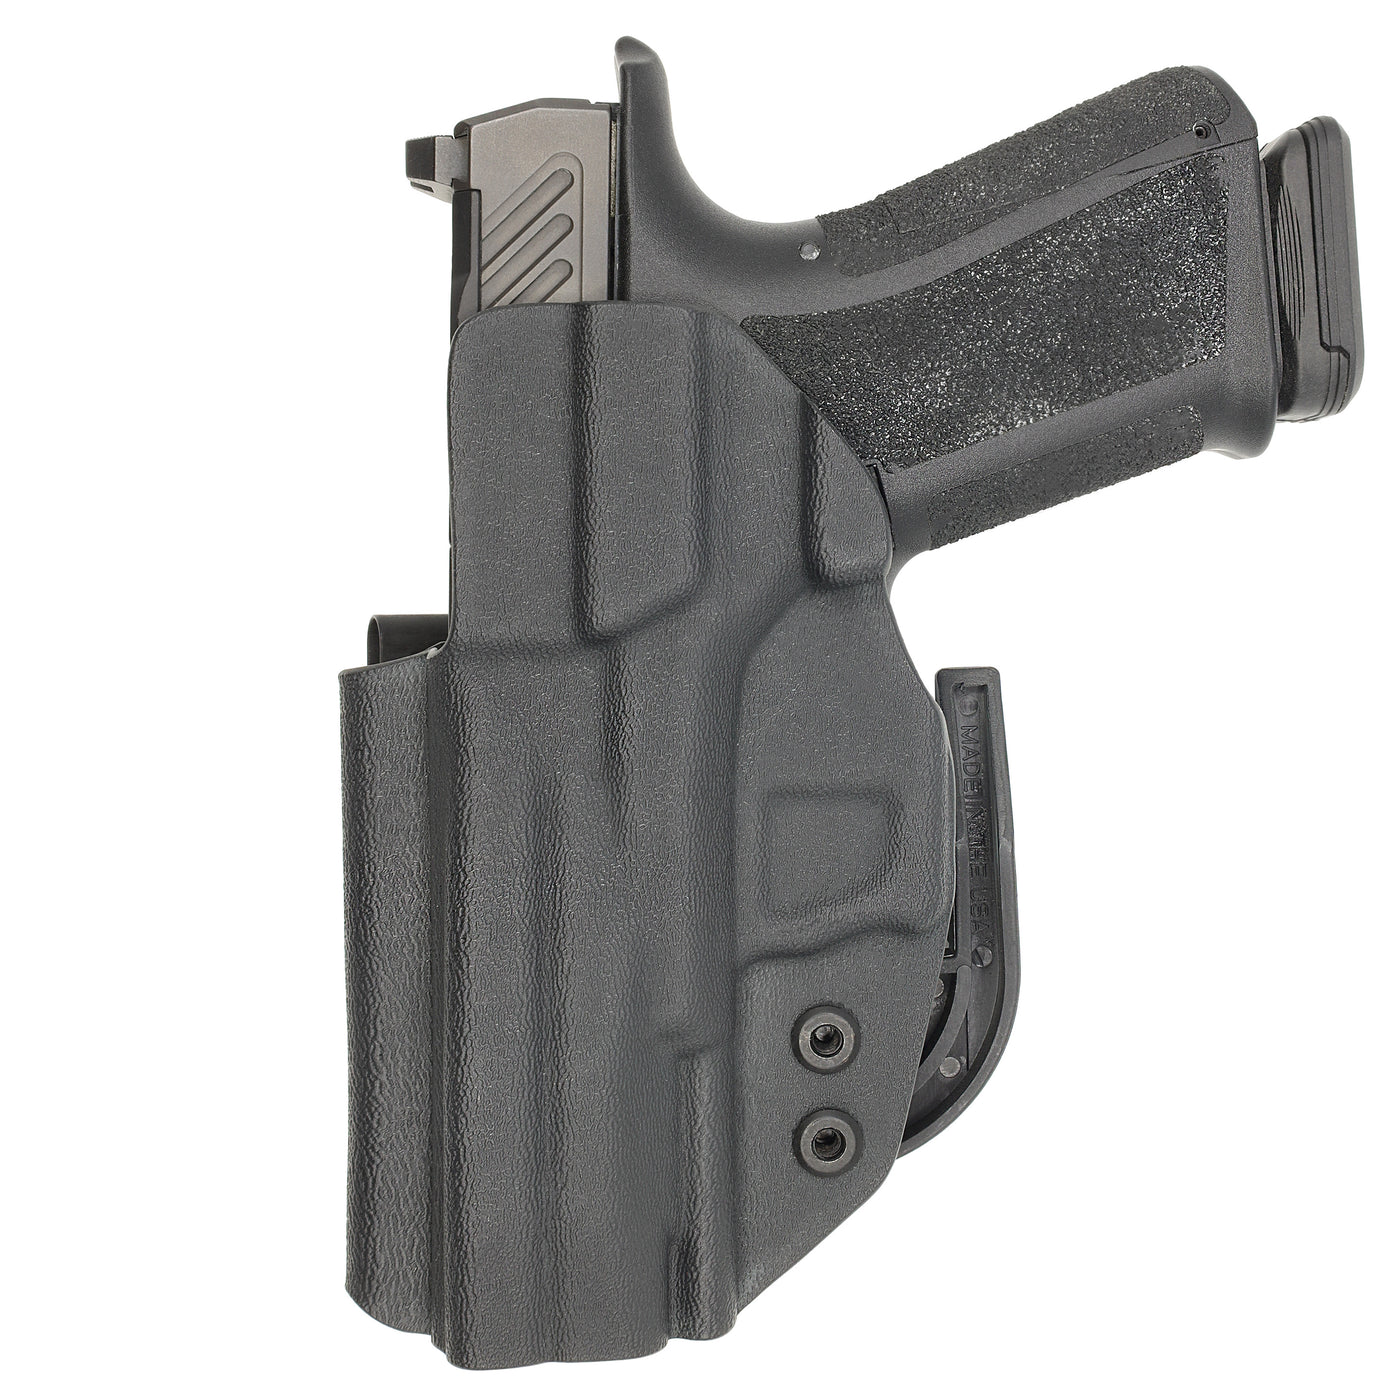 C&G Holsters Custom IWB ALPHA UPGRADE Covert Shadow Systems MR920 holstered back view